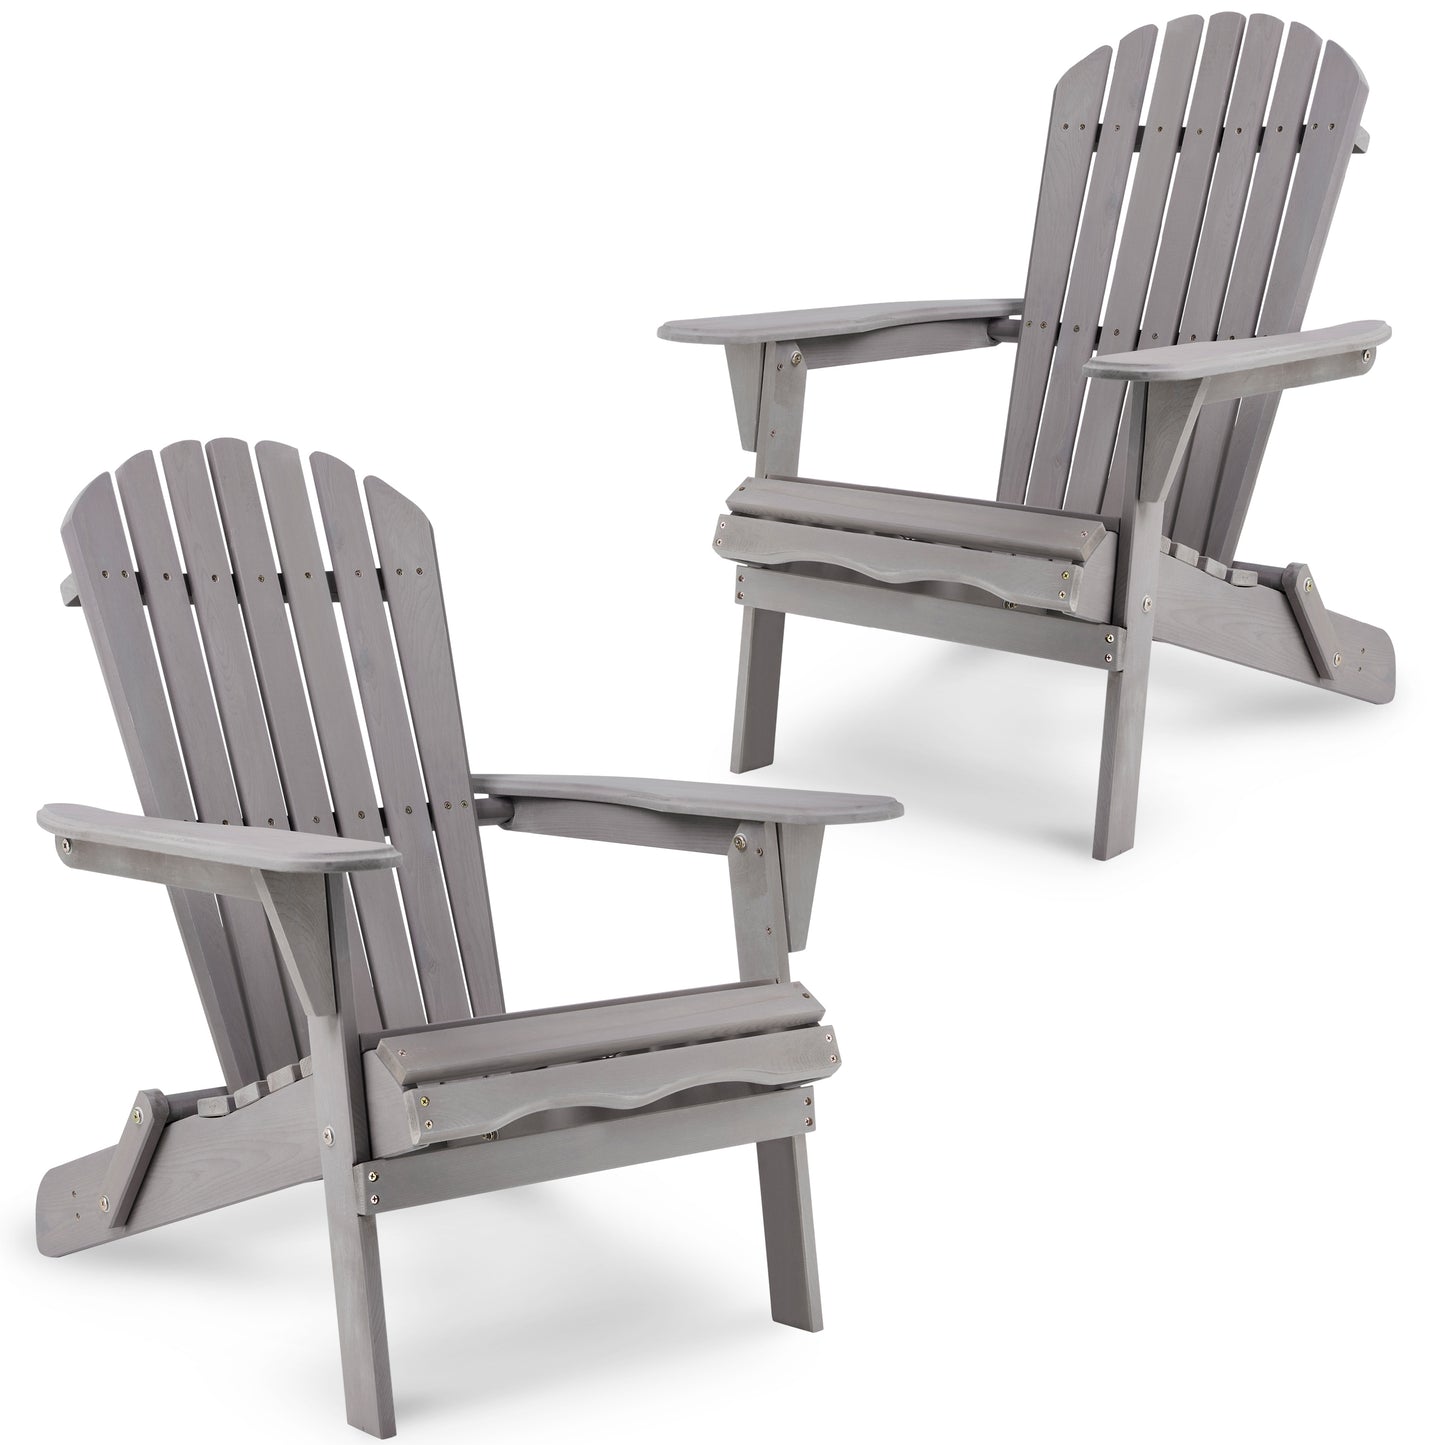 Syngar Folding Adirondack Chairs Set of 2, Outdoor Wooden Lounge Chairs with Pre-Assembled Backrest, Wood Accent Furniture Chairs for Patio, Garden, Porch, Poolside, Max 220lbs, Natural & Light Brown